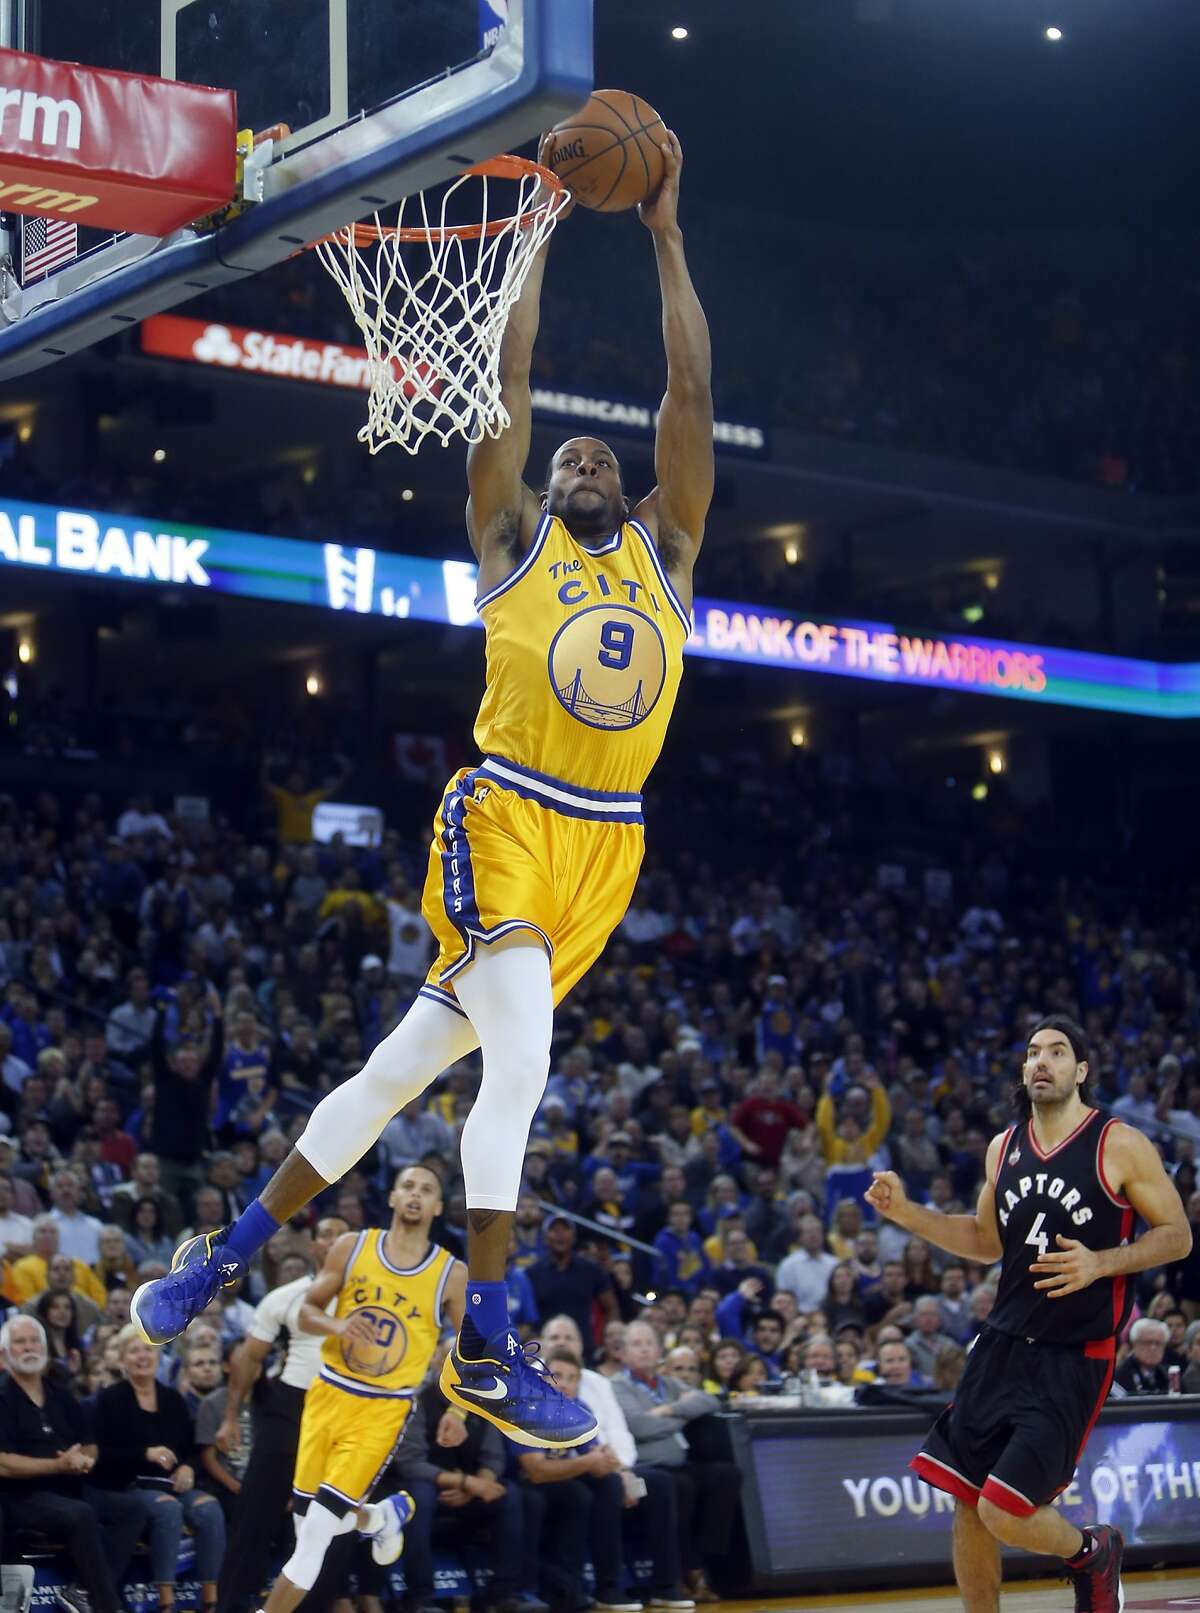 Golden State Warriors' Andre Iguodala dunks as Toronto Raptors' Luis Scola watches in 2nd quarter during NBA game at Oracle Arena in Oakland, Calif., on Tuesday, November 17, 2015.